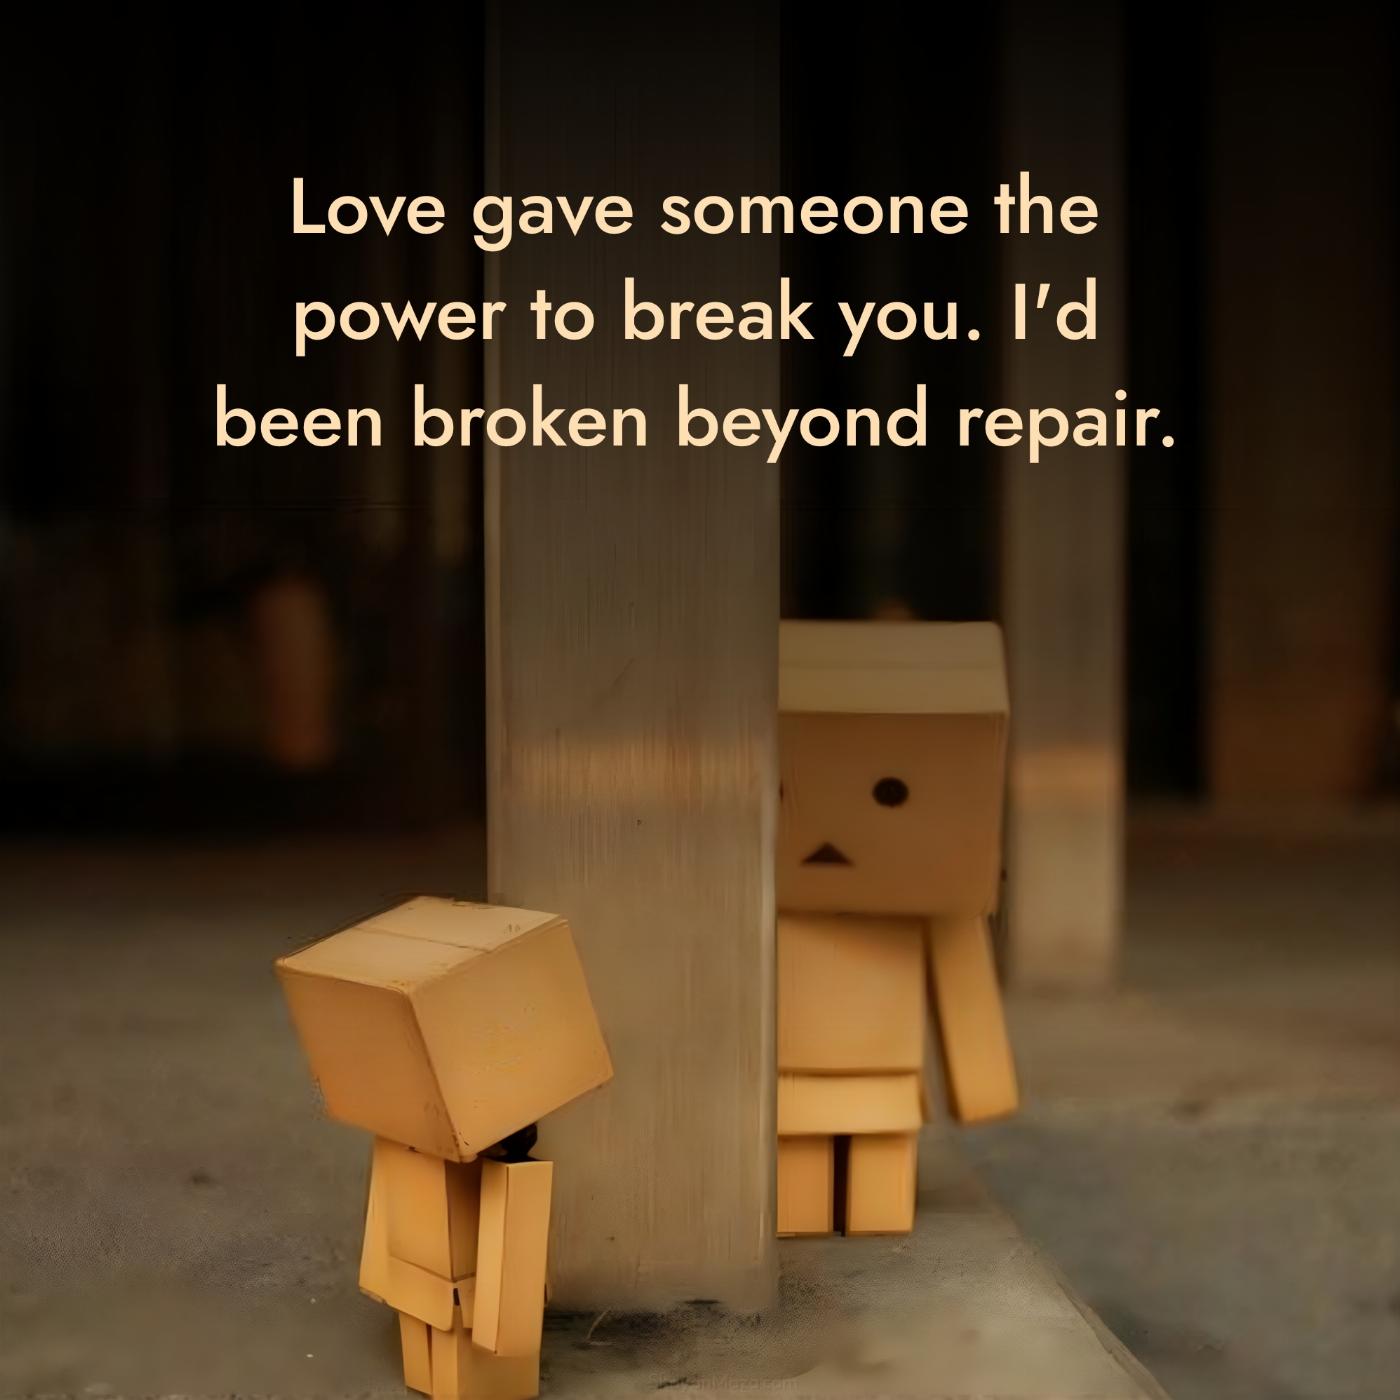 Love gave someone the power to break you